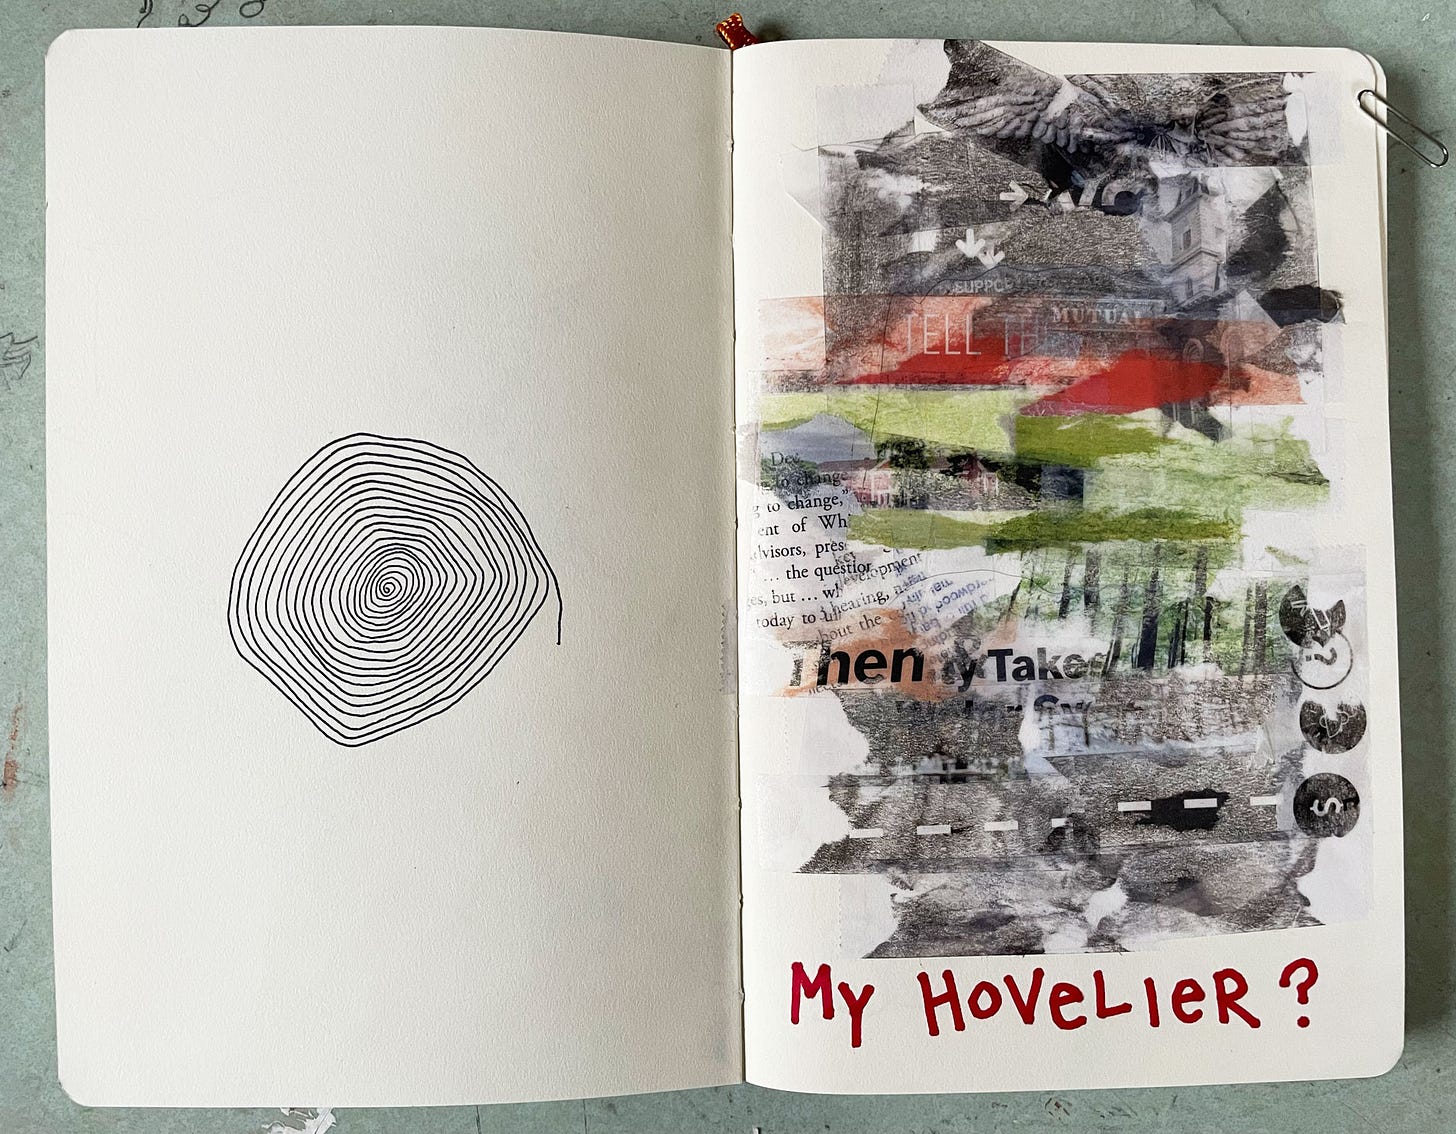 Sketchbook with drawing of a spiral and collage